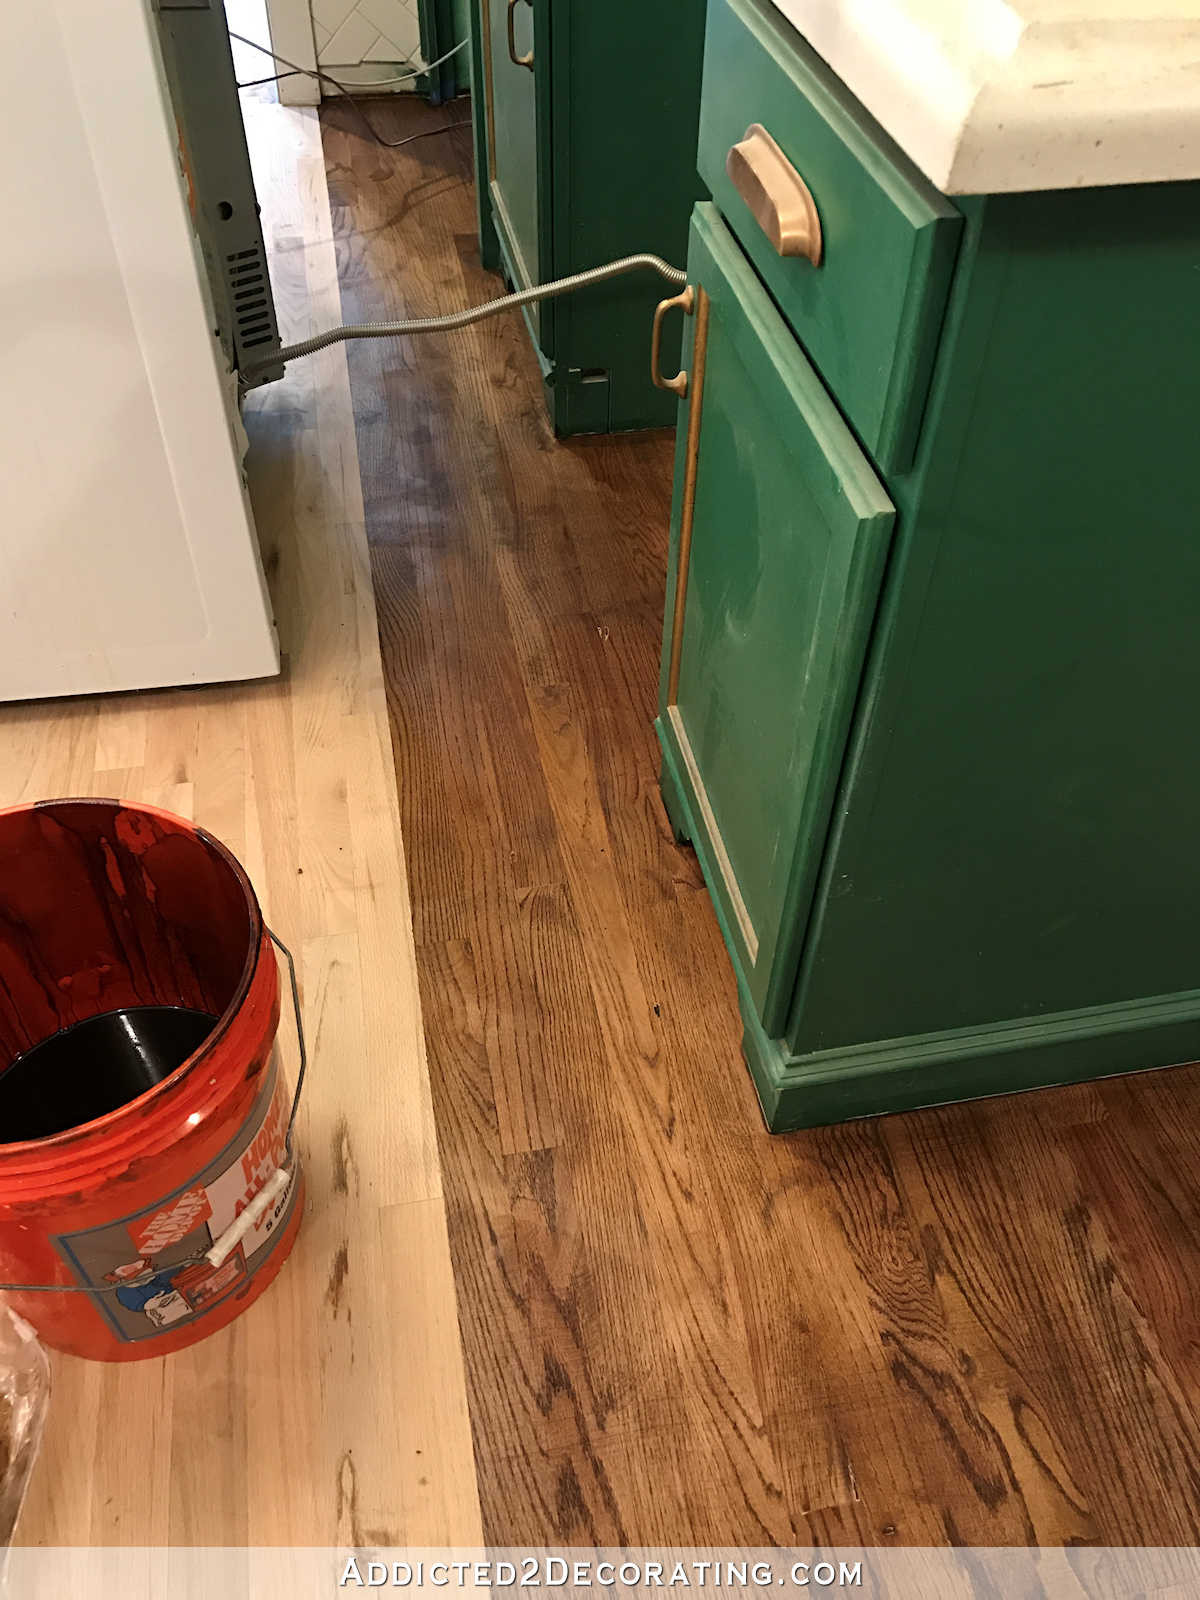 29 Amazing Hardwood Floor Two Different Colors 2024 free download hardwood floor two different colors of adventures in staining my red oak hardwood floors products process inside staining red oak hardwood floors 10 stain on kitchen floor behind stove and r